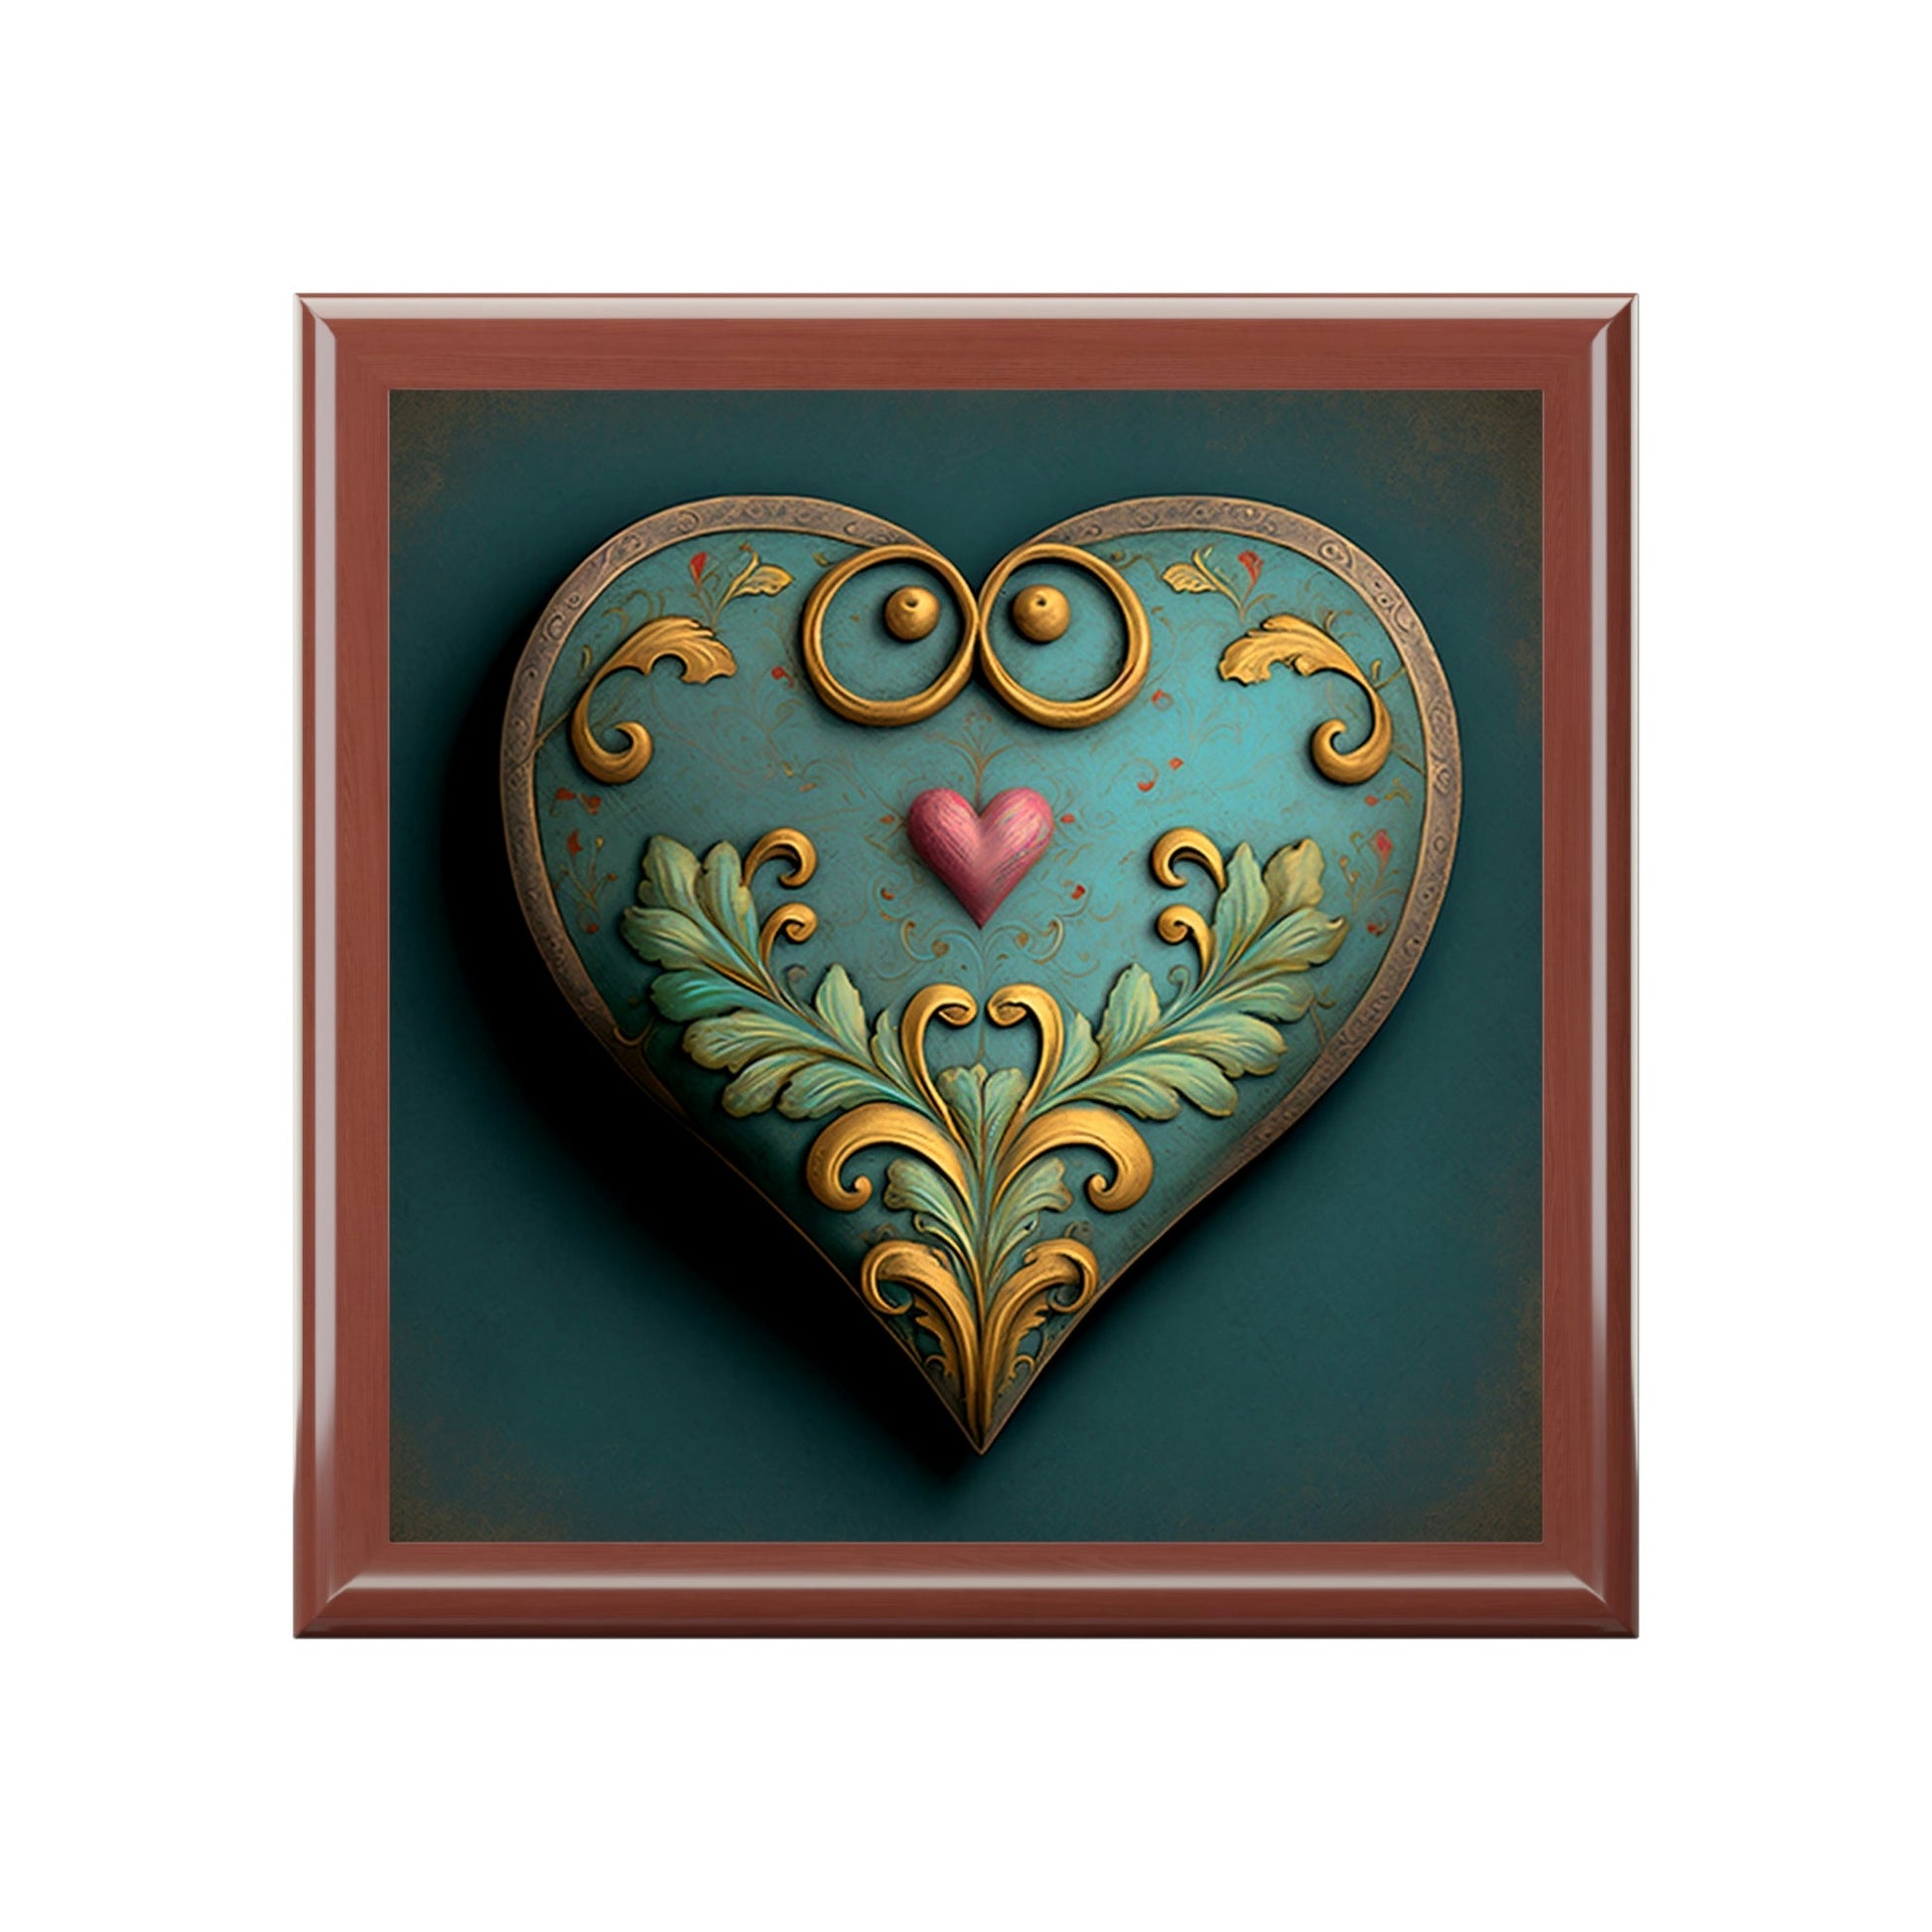 Antique Vintage Heart Wood Keepsake Jewelry Box with Ceramic Tile Cover